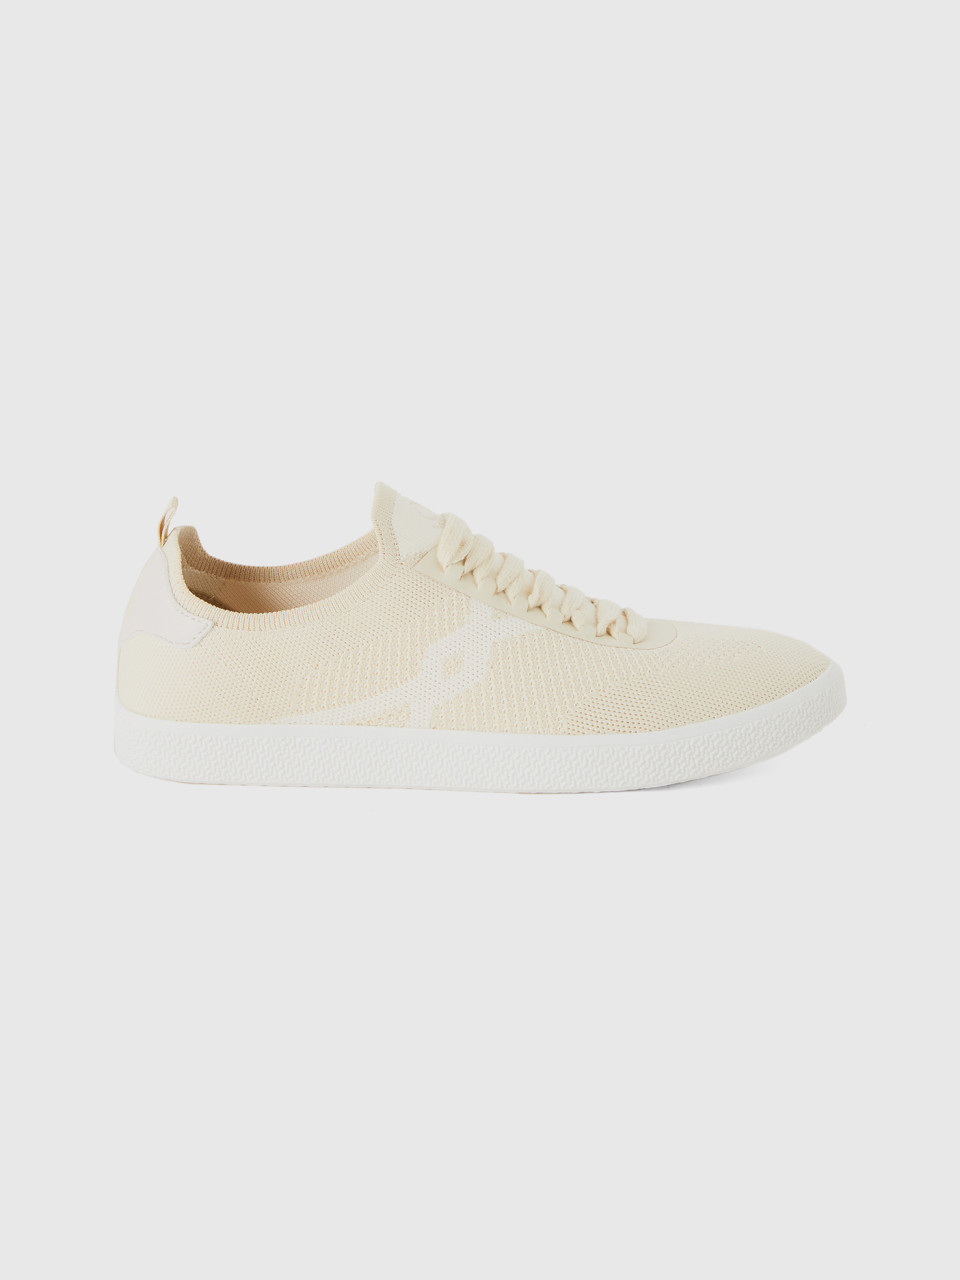 Benetton, Low-top Sneakers In Cream And Beige,5, Creamy White